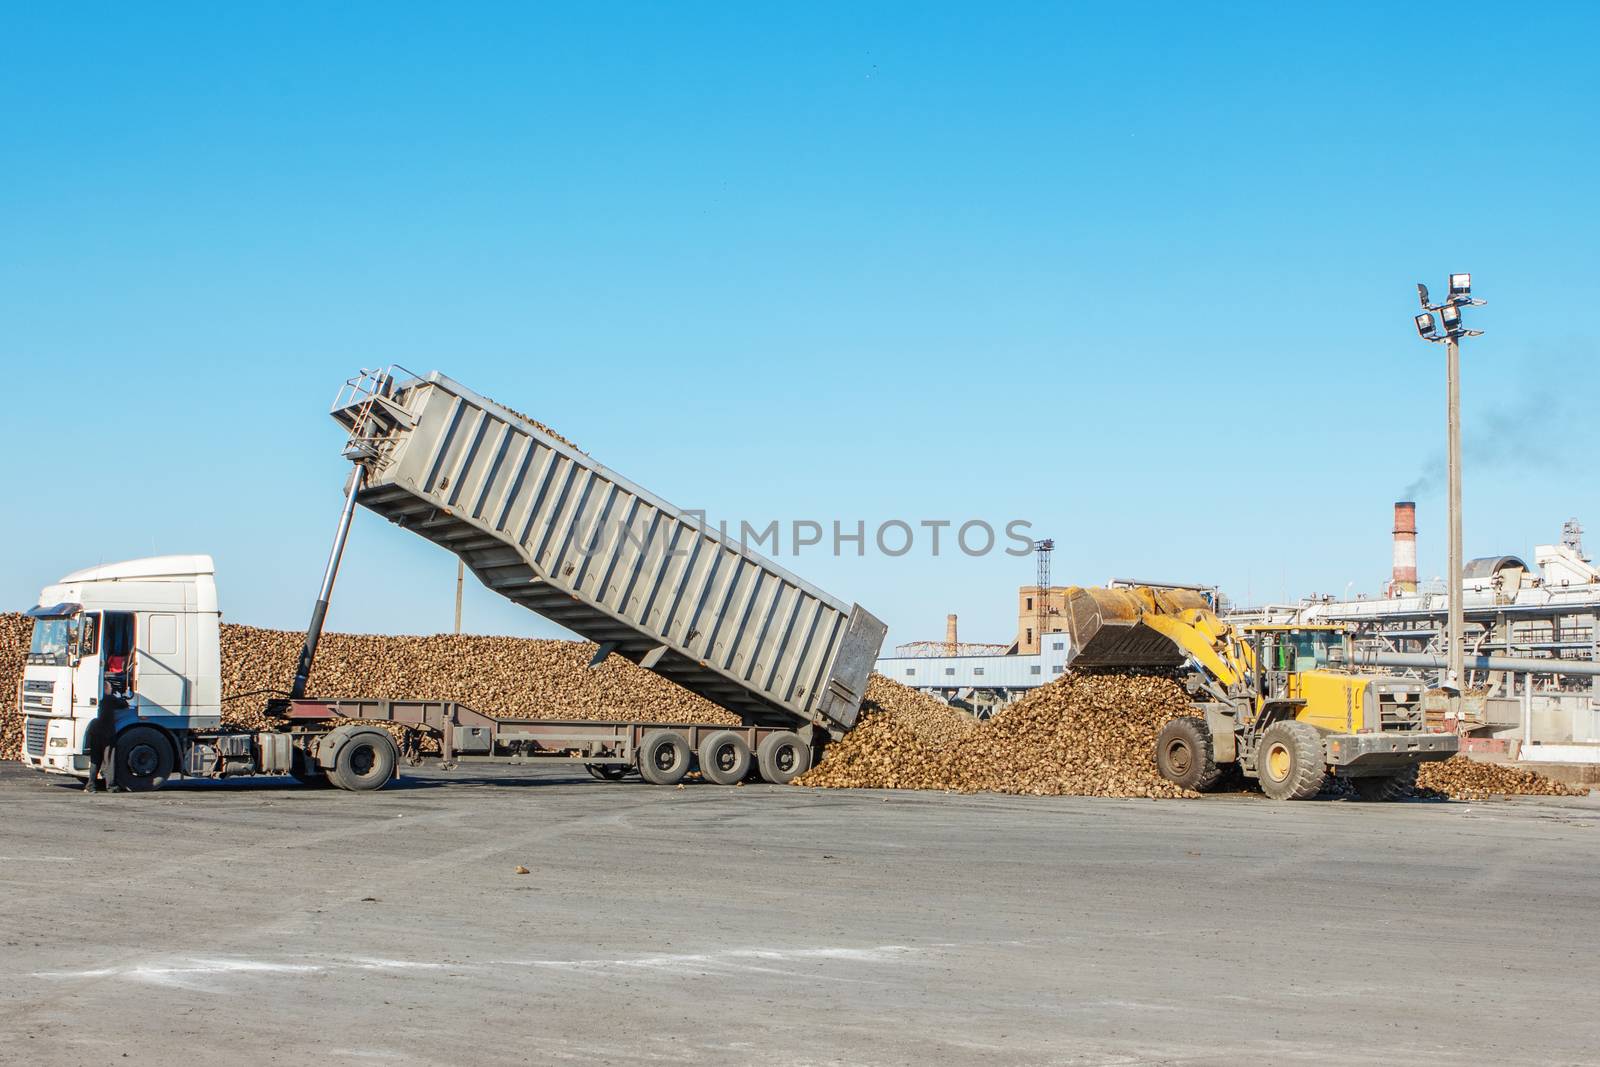 Front-end loader in action on the loading of sugar beet at a sugar factory. sugar beet harvest - truck waiting in front of off-loaded beet in factory for the production of sugar